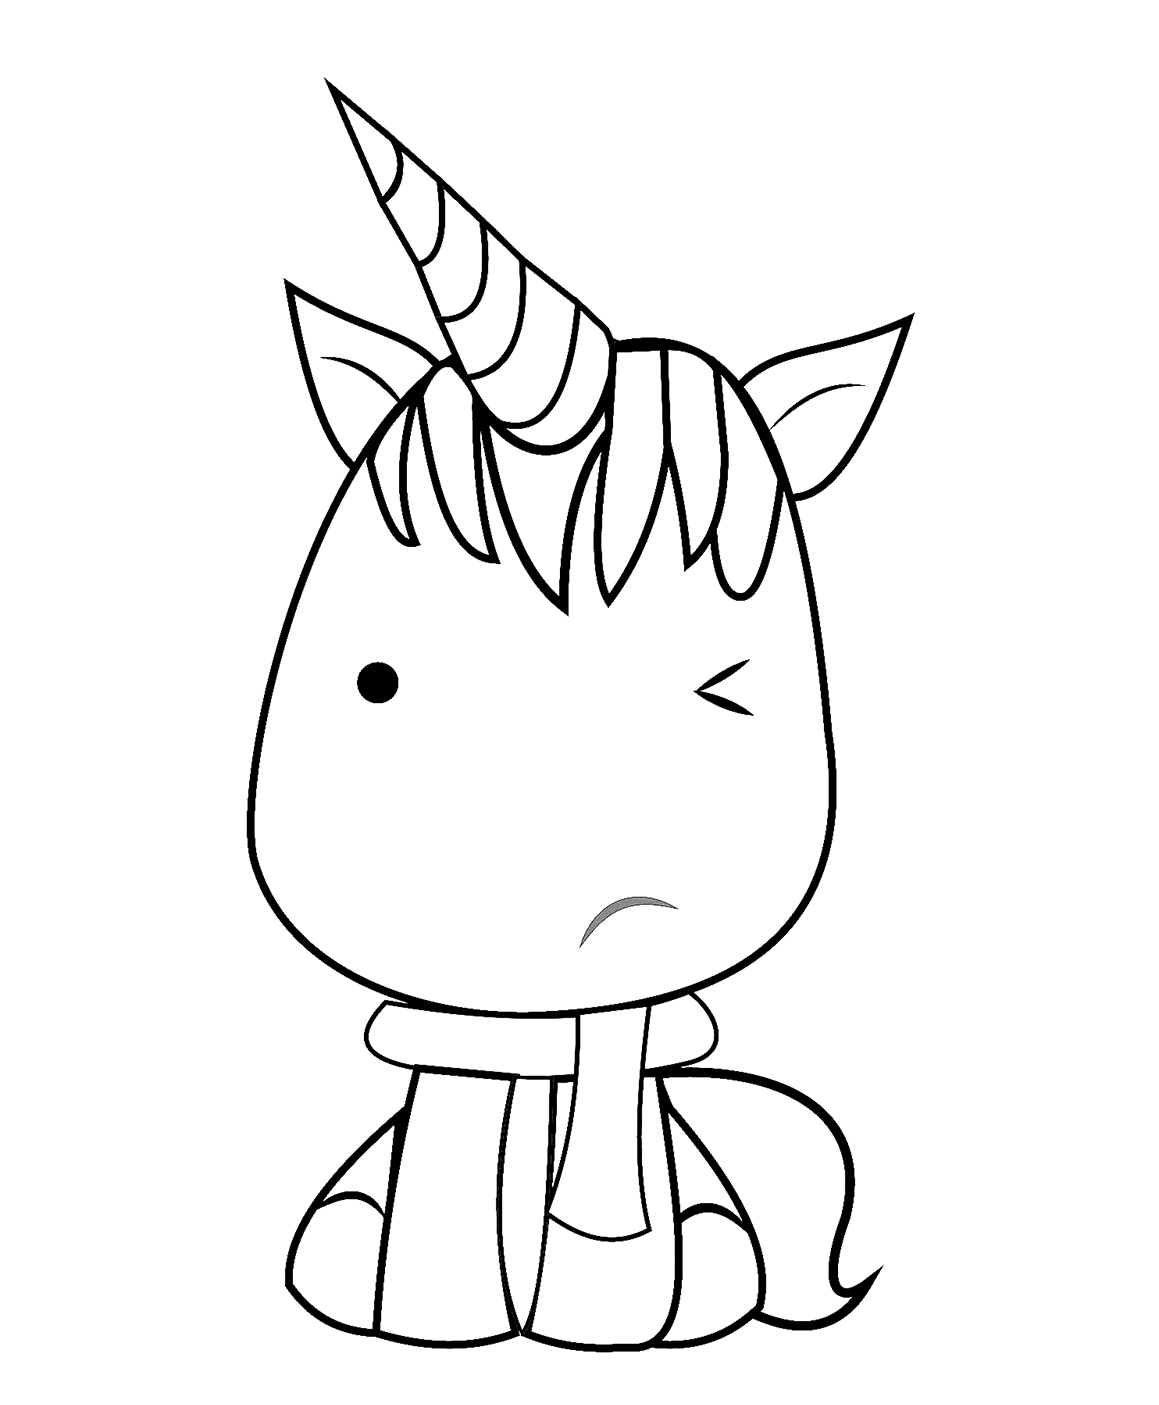 kawaii unicorn coloring page coloring pages coloring cool